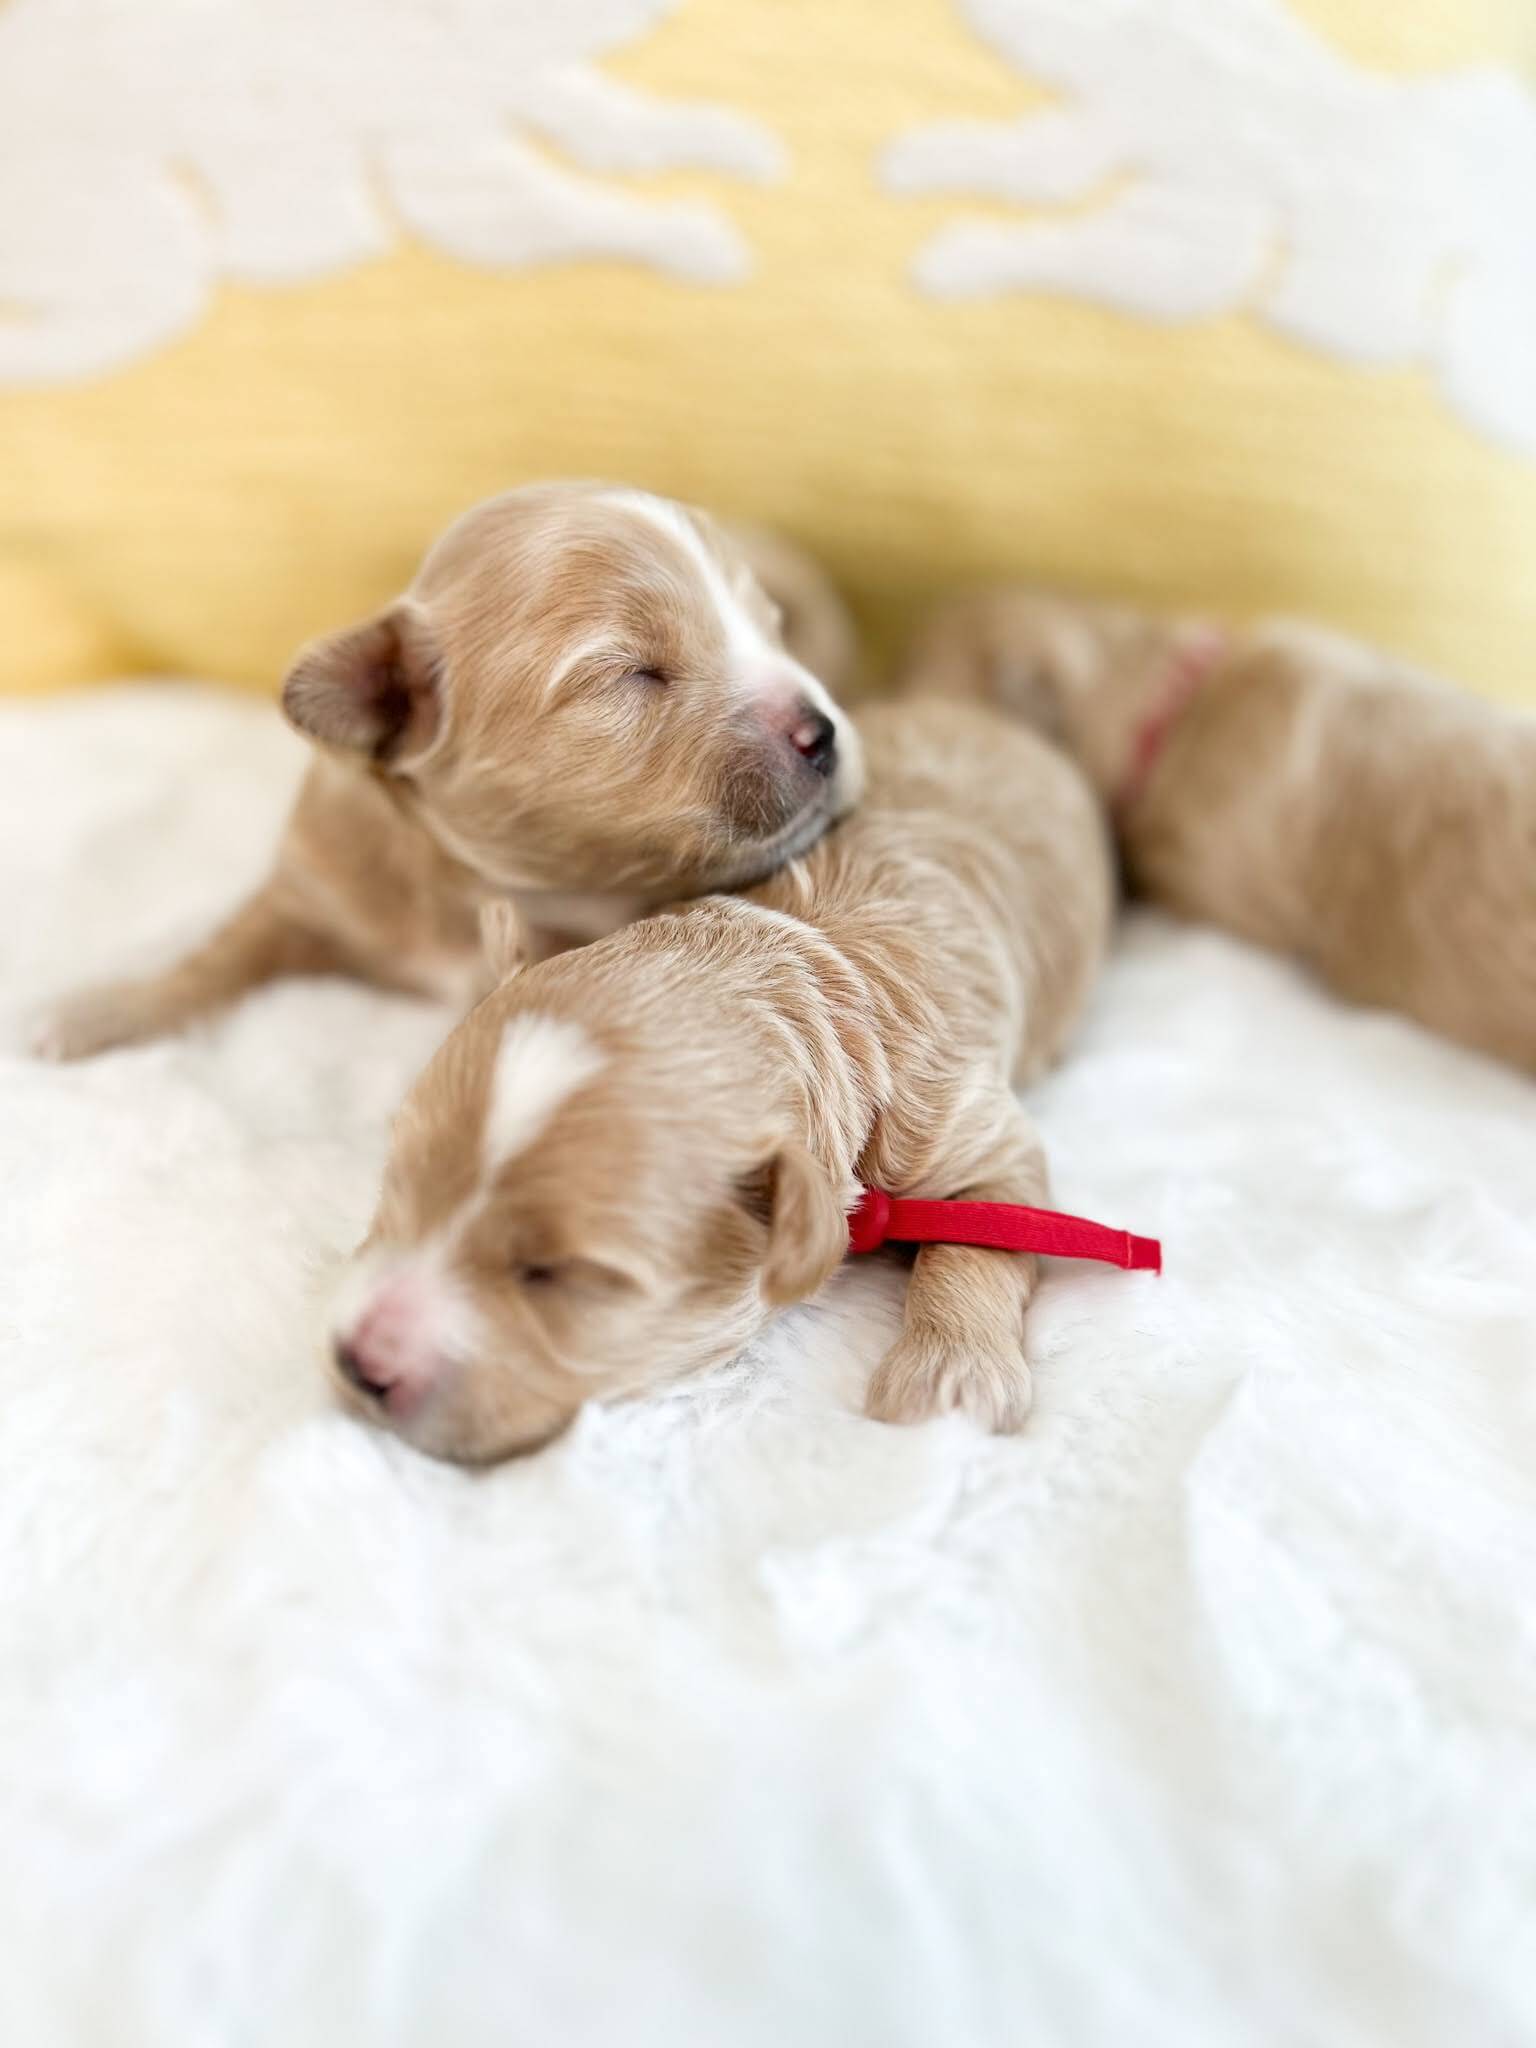 Two adorable puppies are peacefully sleeping on a comfortable bed, with their paws and noses touching each other.